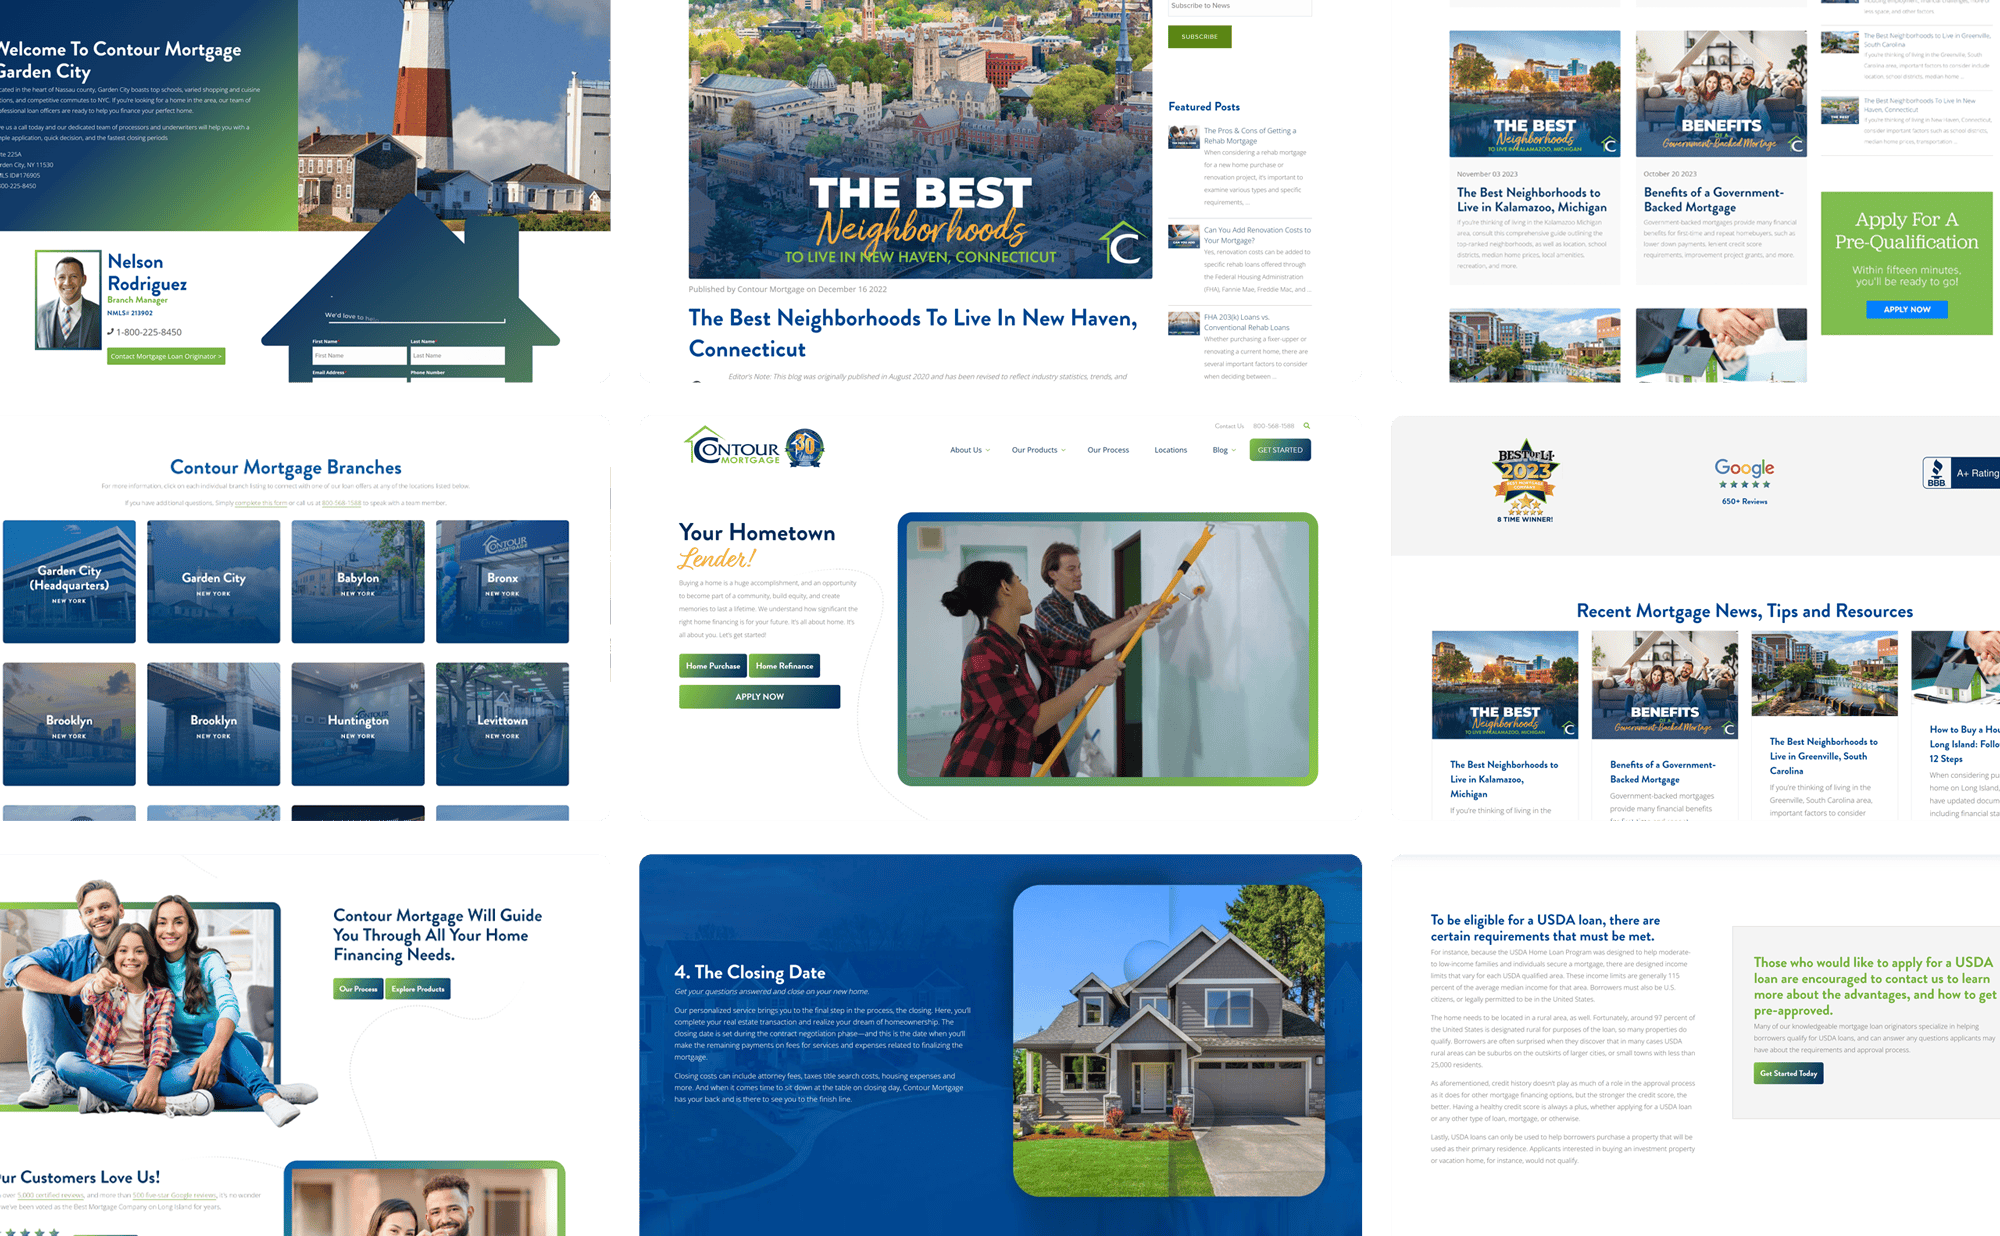 various screenshots of images from Contour Mortgage website